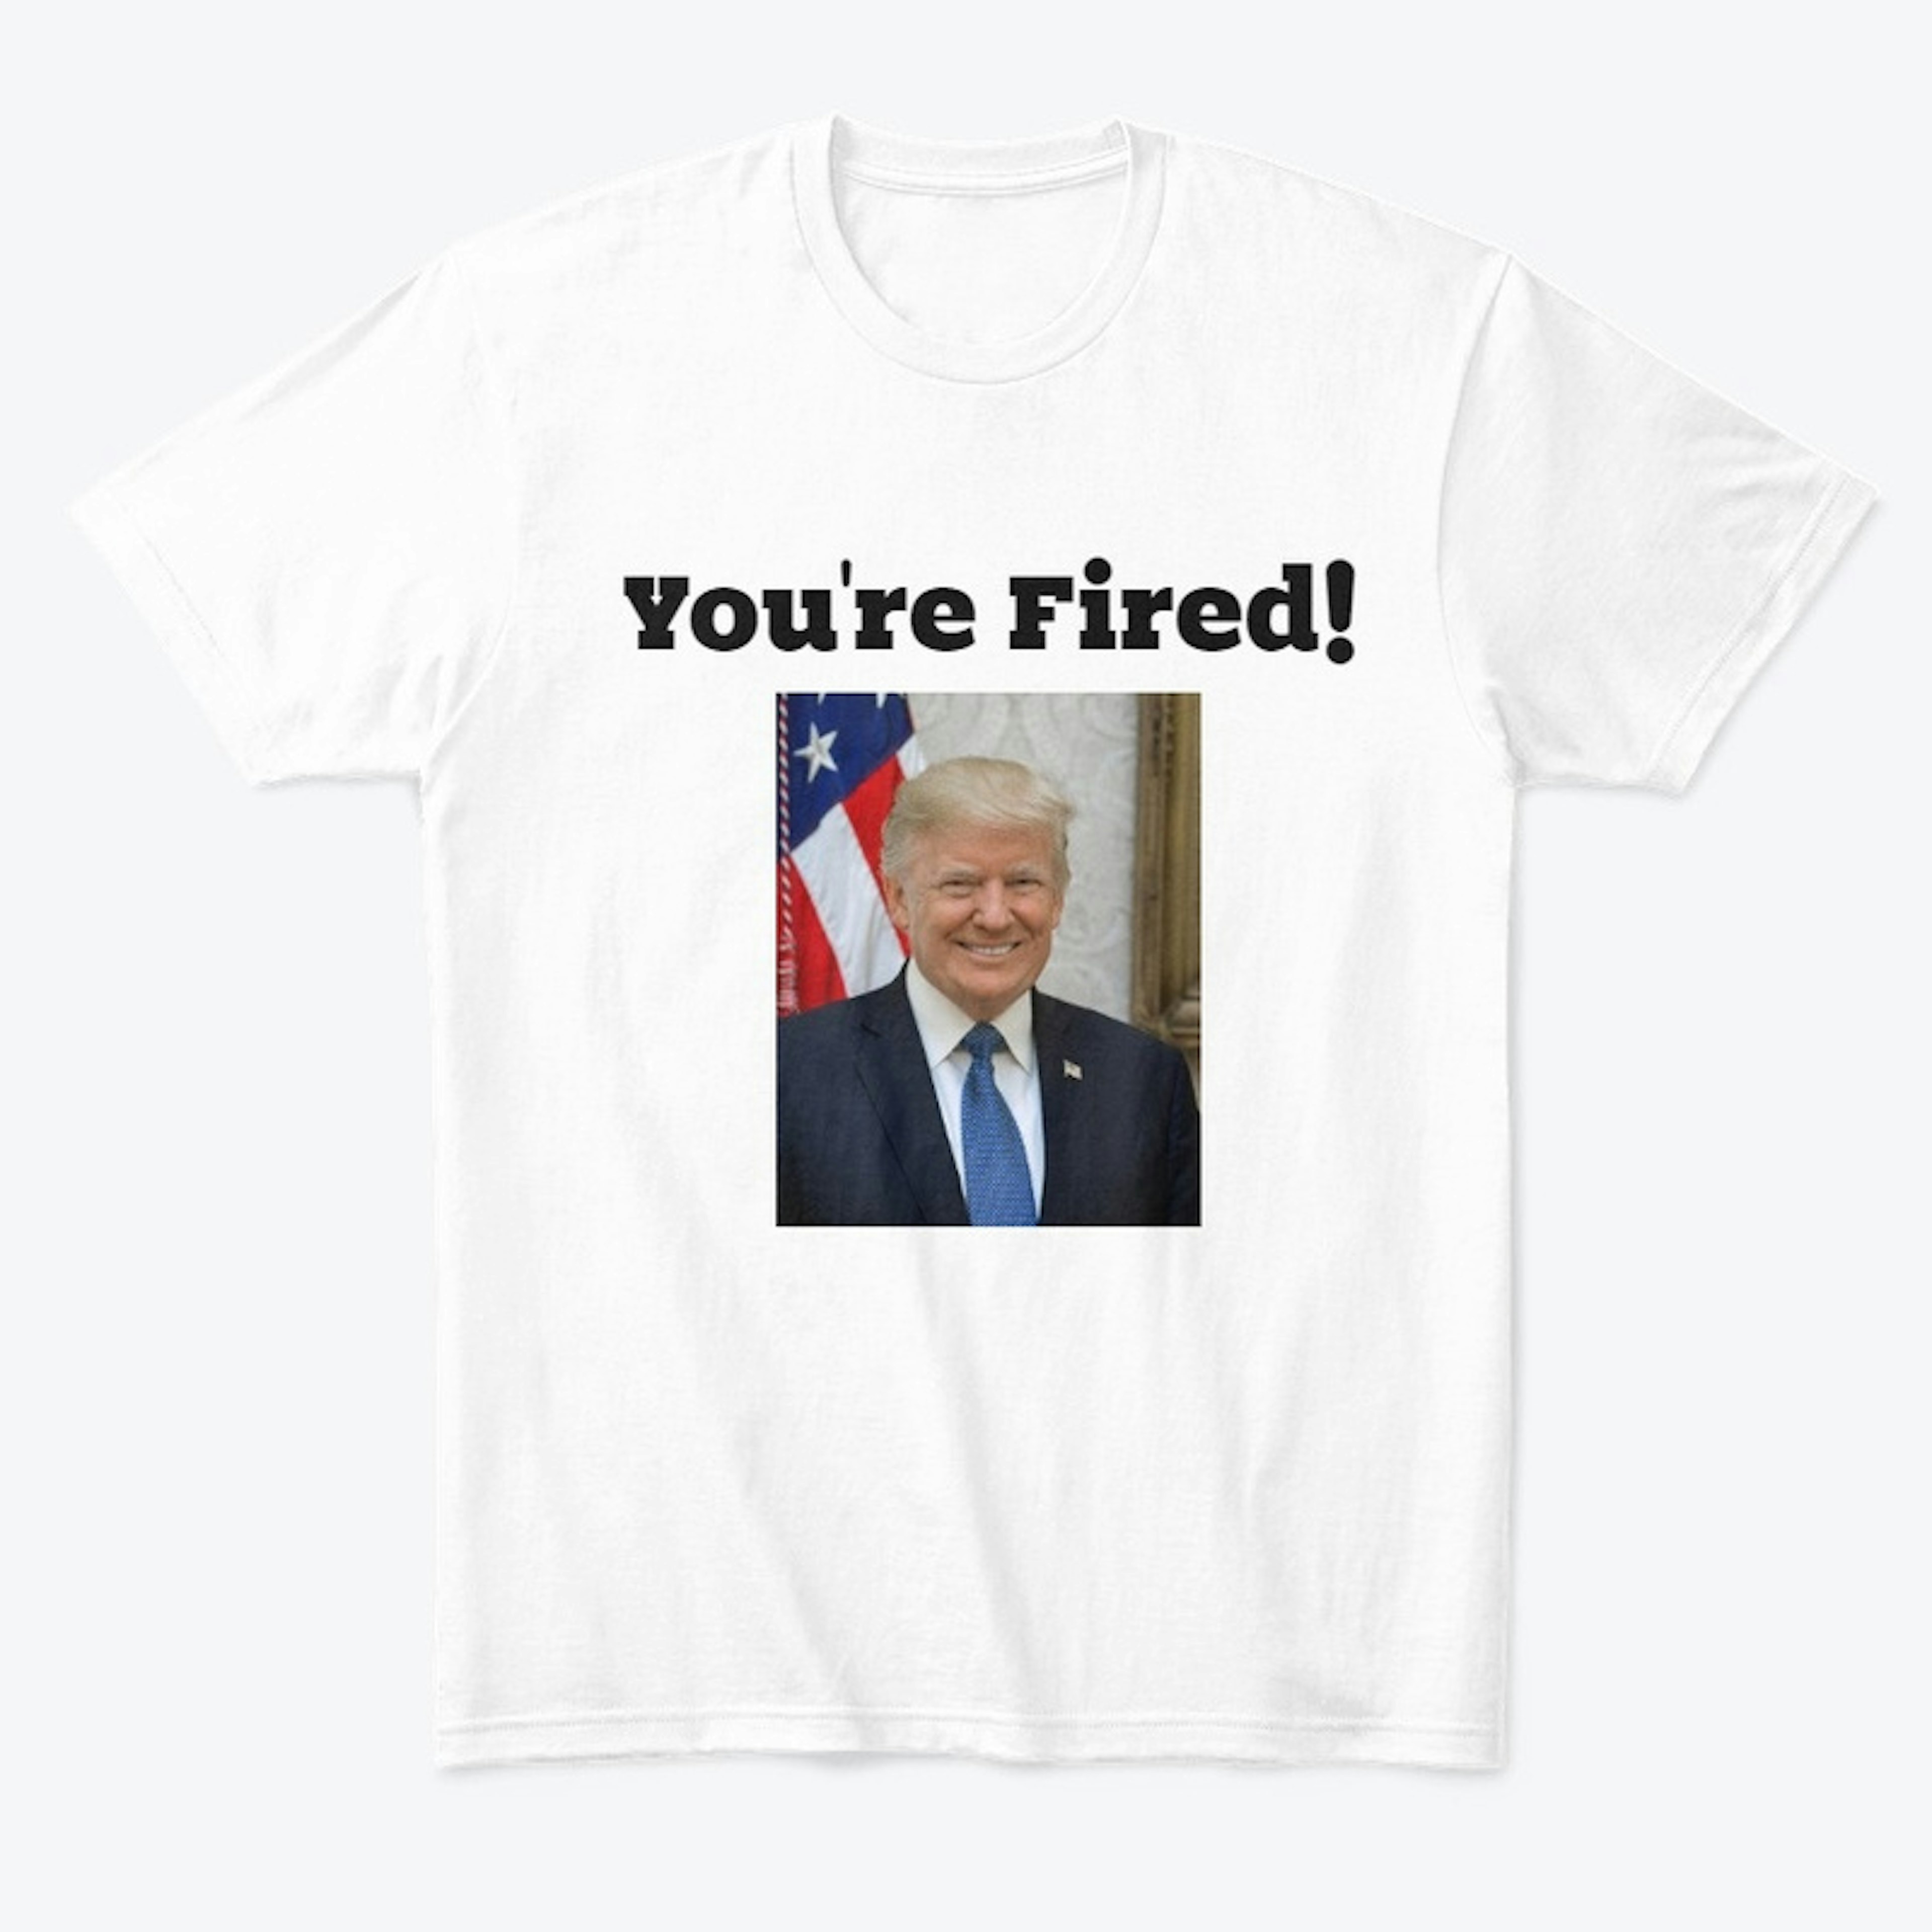 You're Fired T-Shirt!